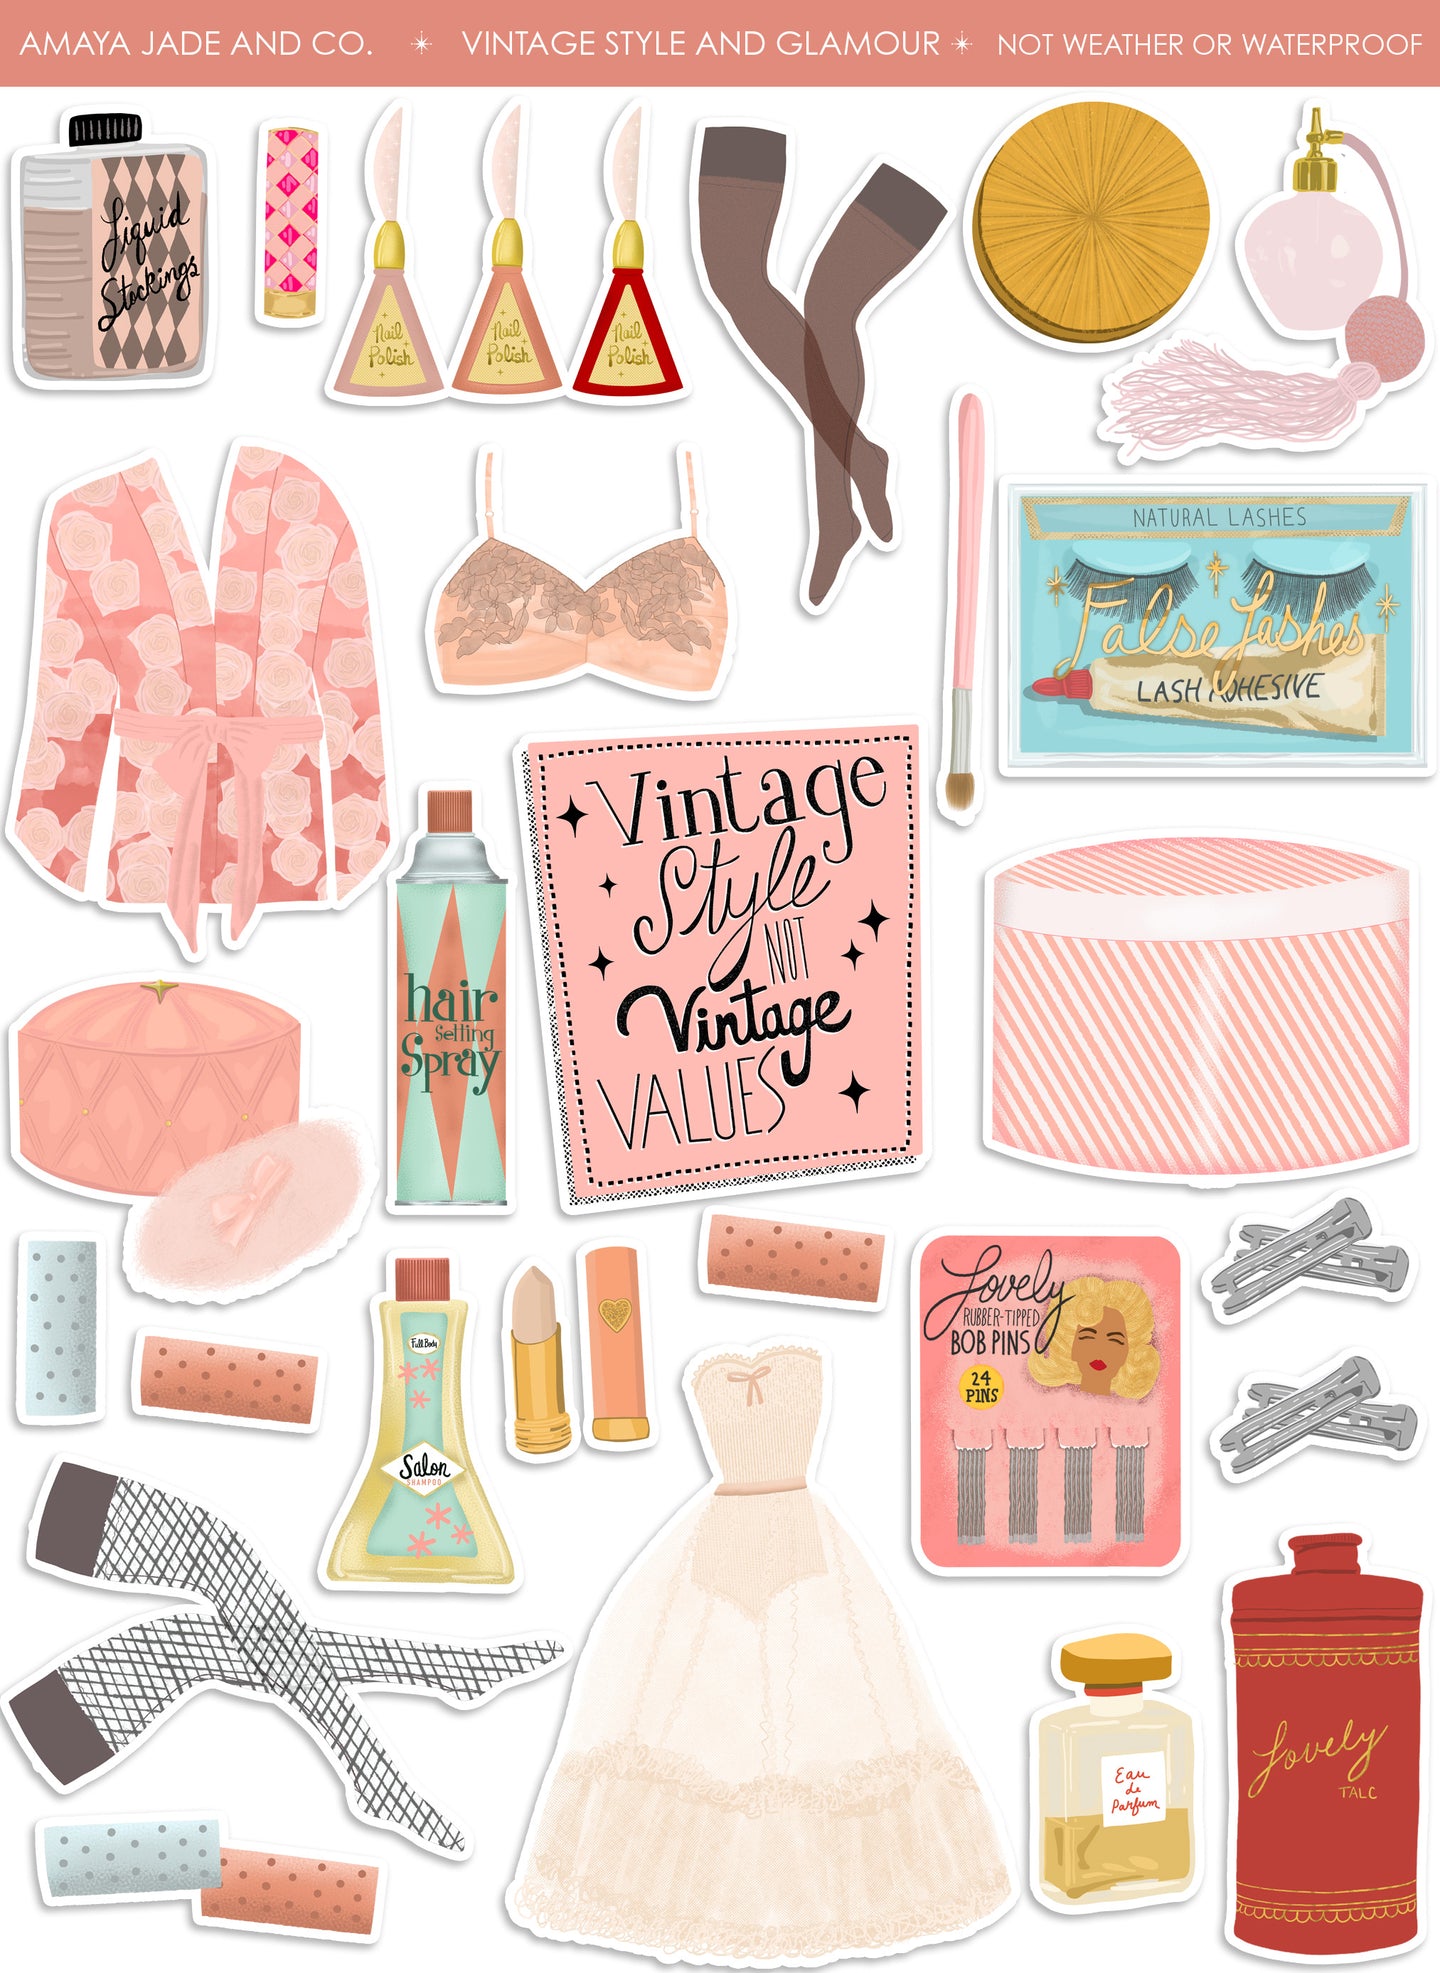 Vintage Style and Glamour Art Sticker Set